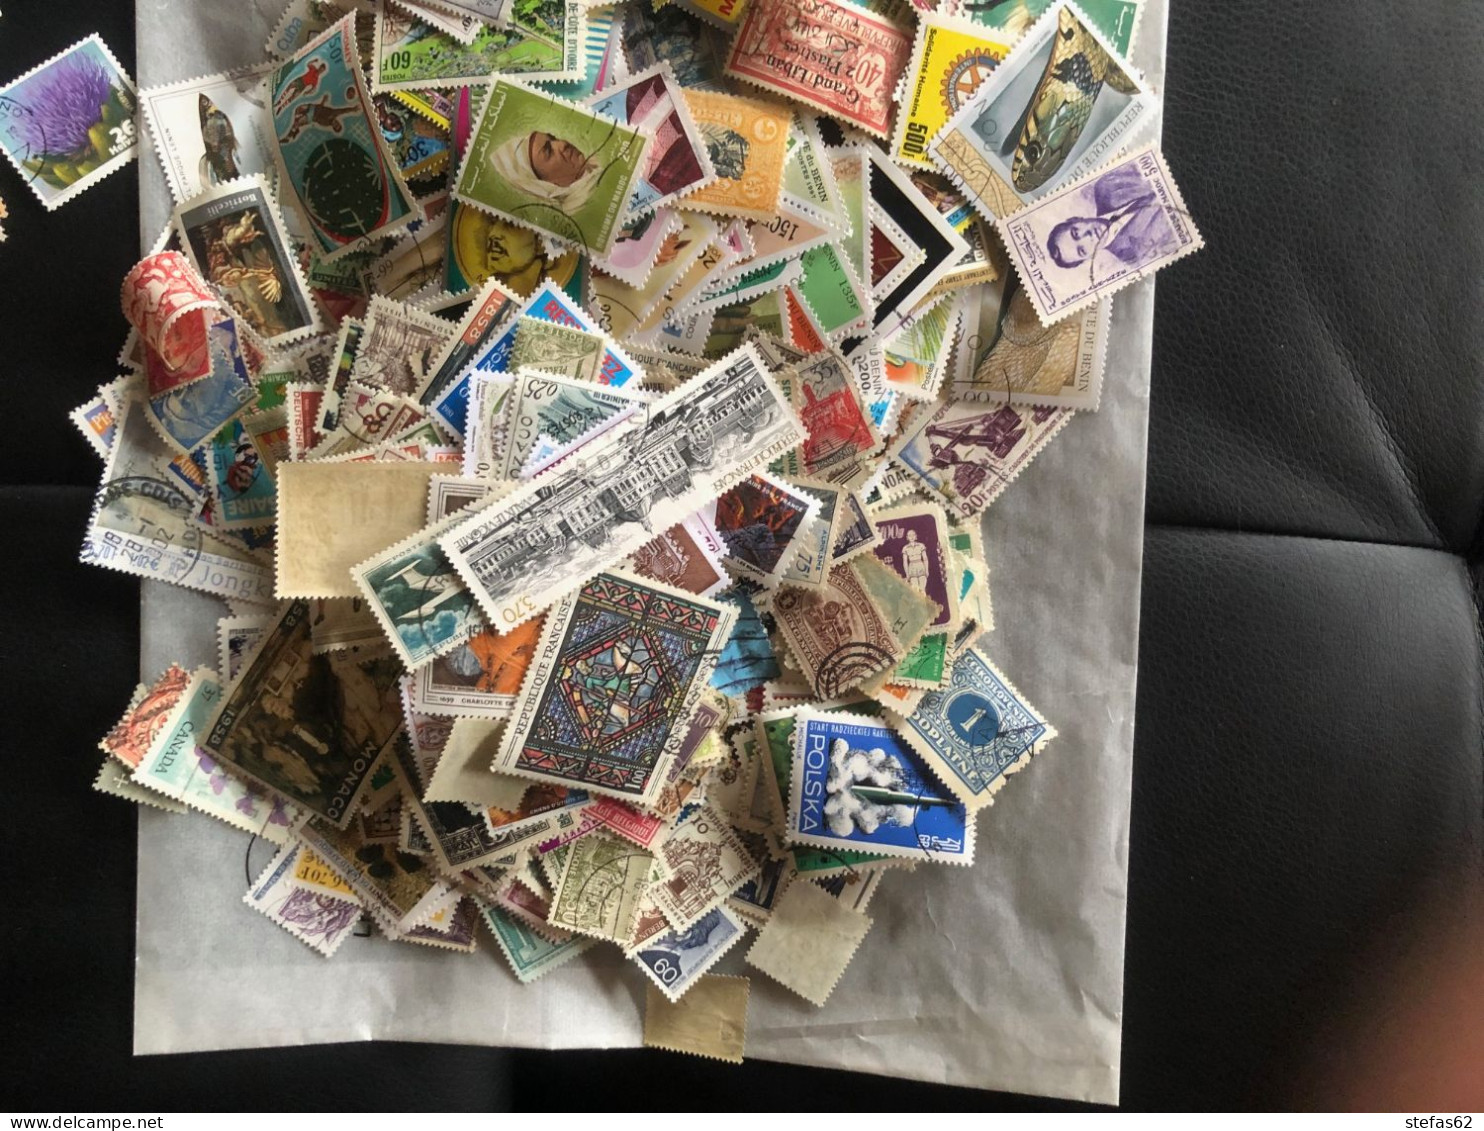 Lot 2000 Timbres Tout Pays - Lots & Kiloware (mixtures) - Min. 1000 Stamps